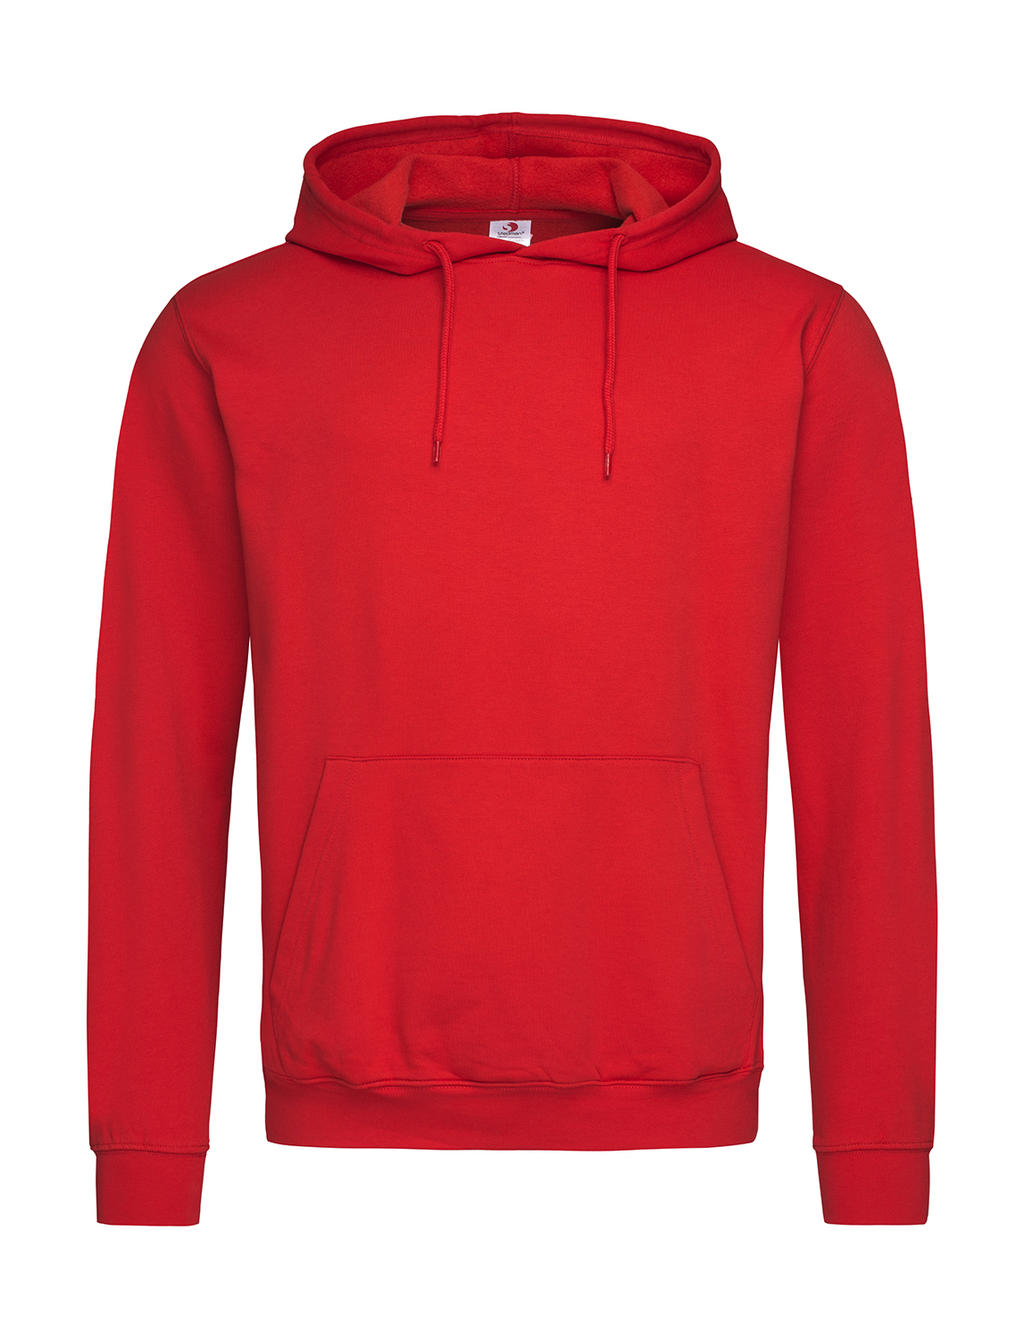 Sweat Hoodie Classic - scarlet red